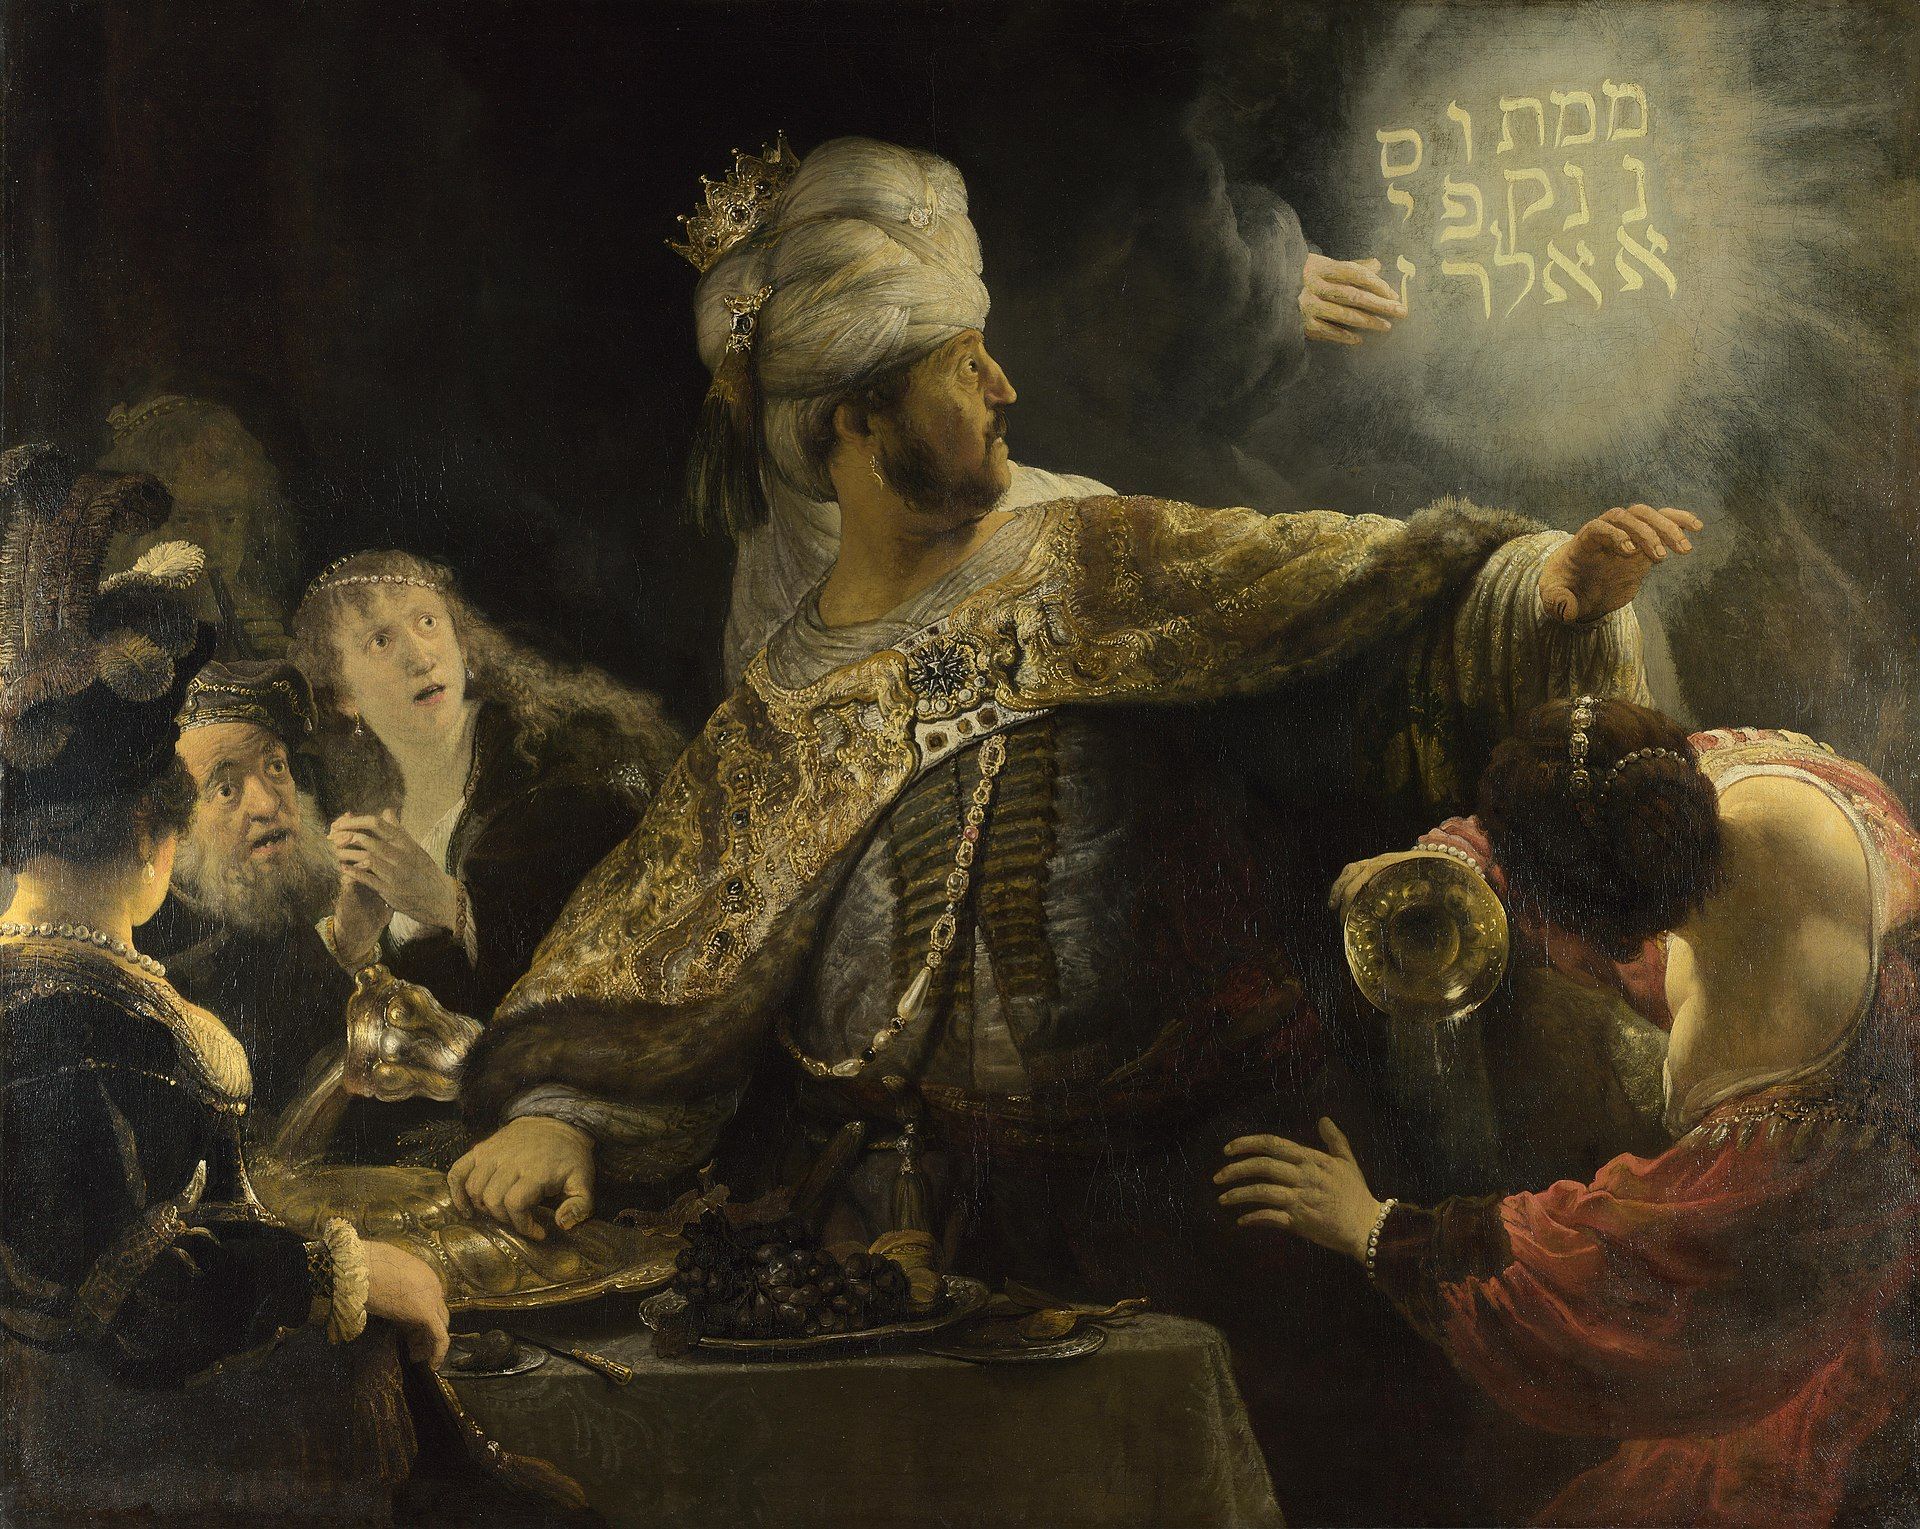 Belshazzar sees the handwriting on the wall.